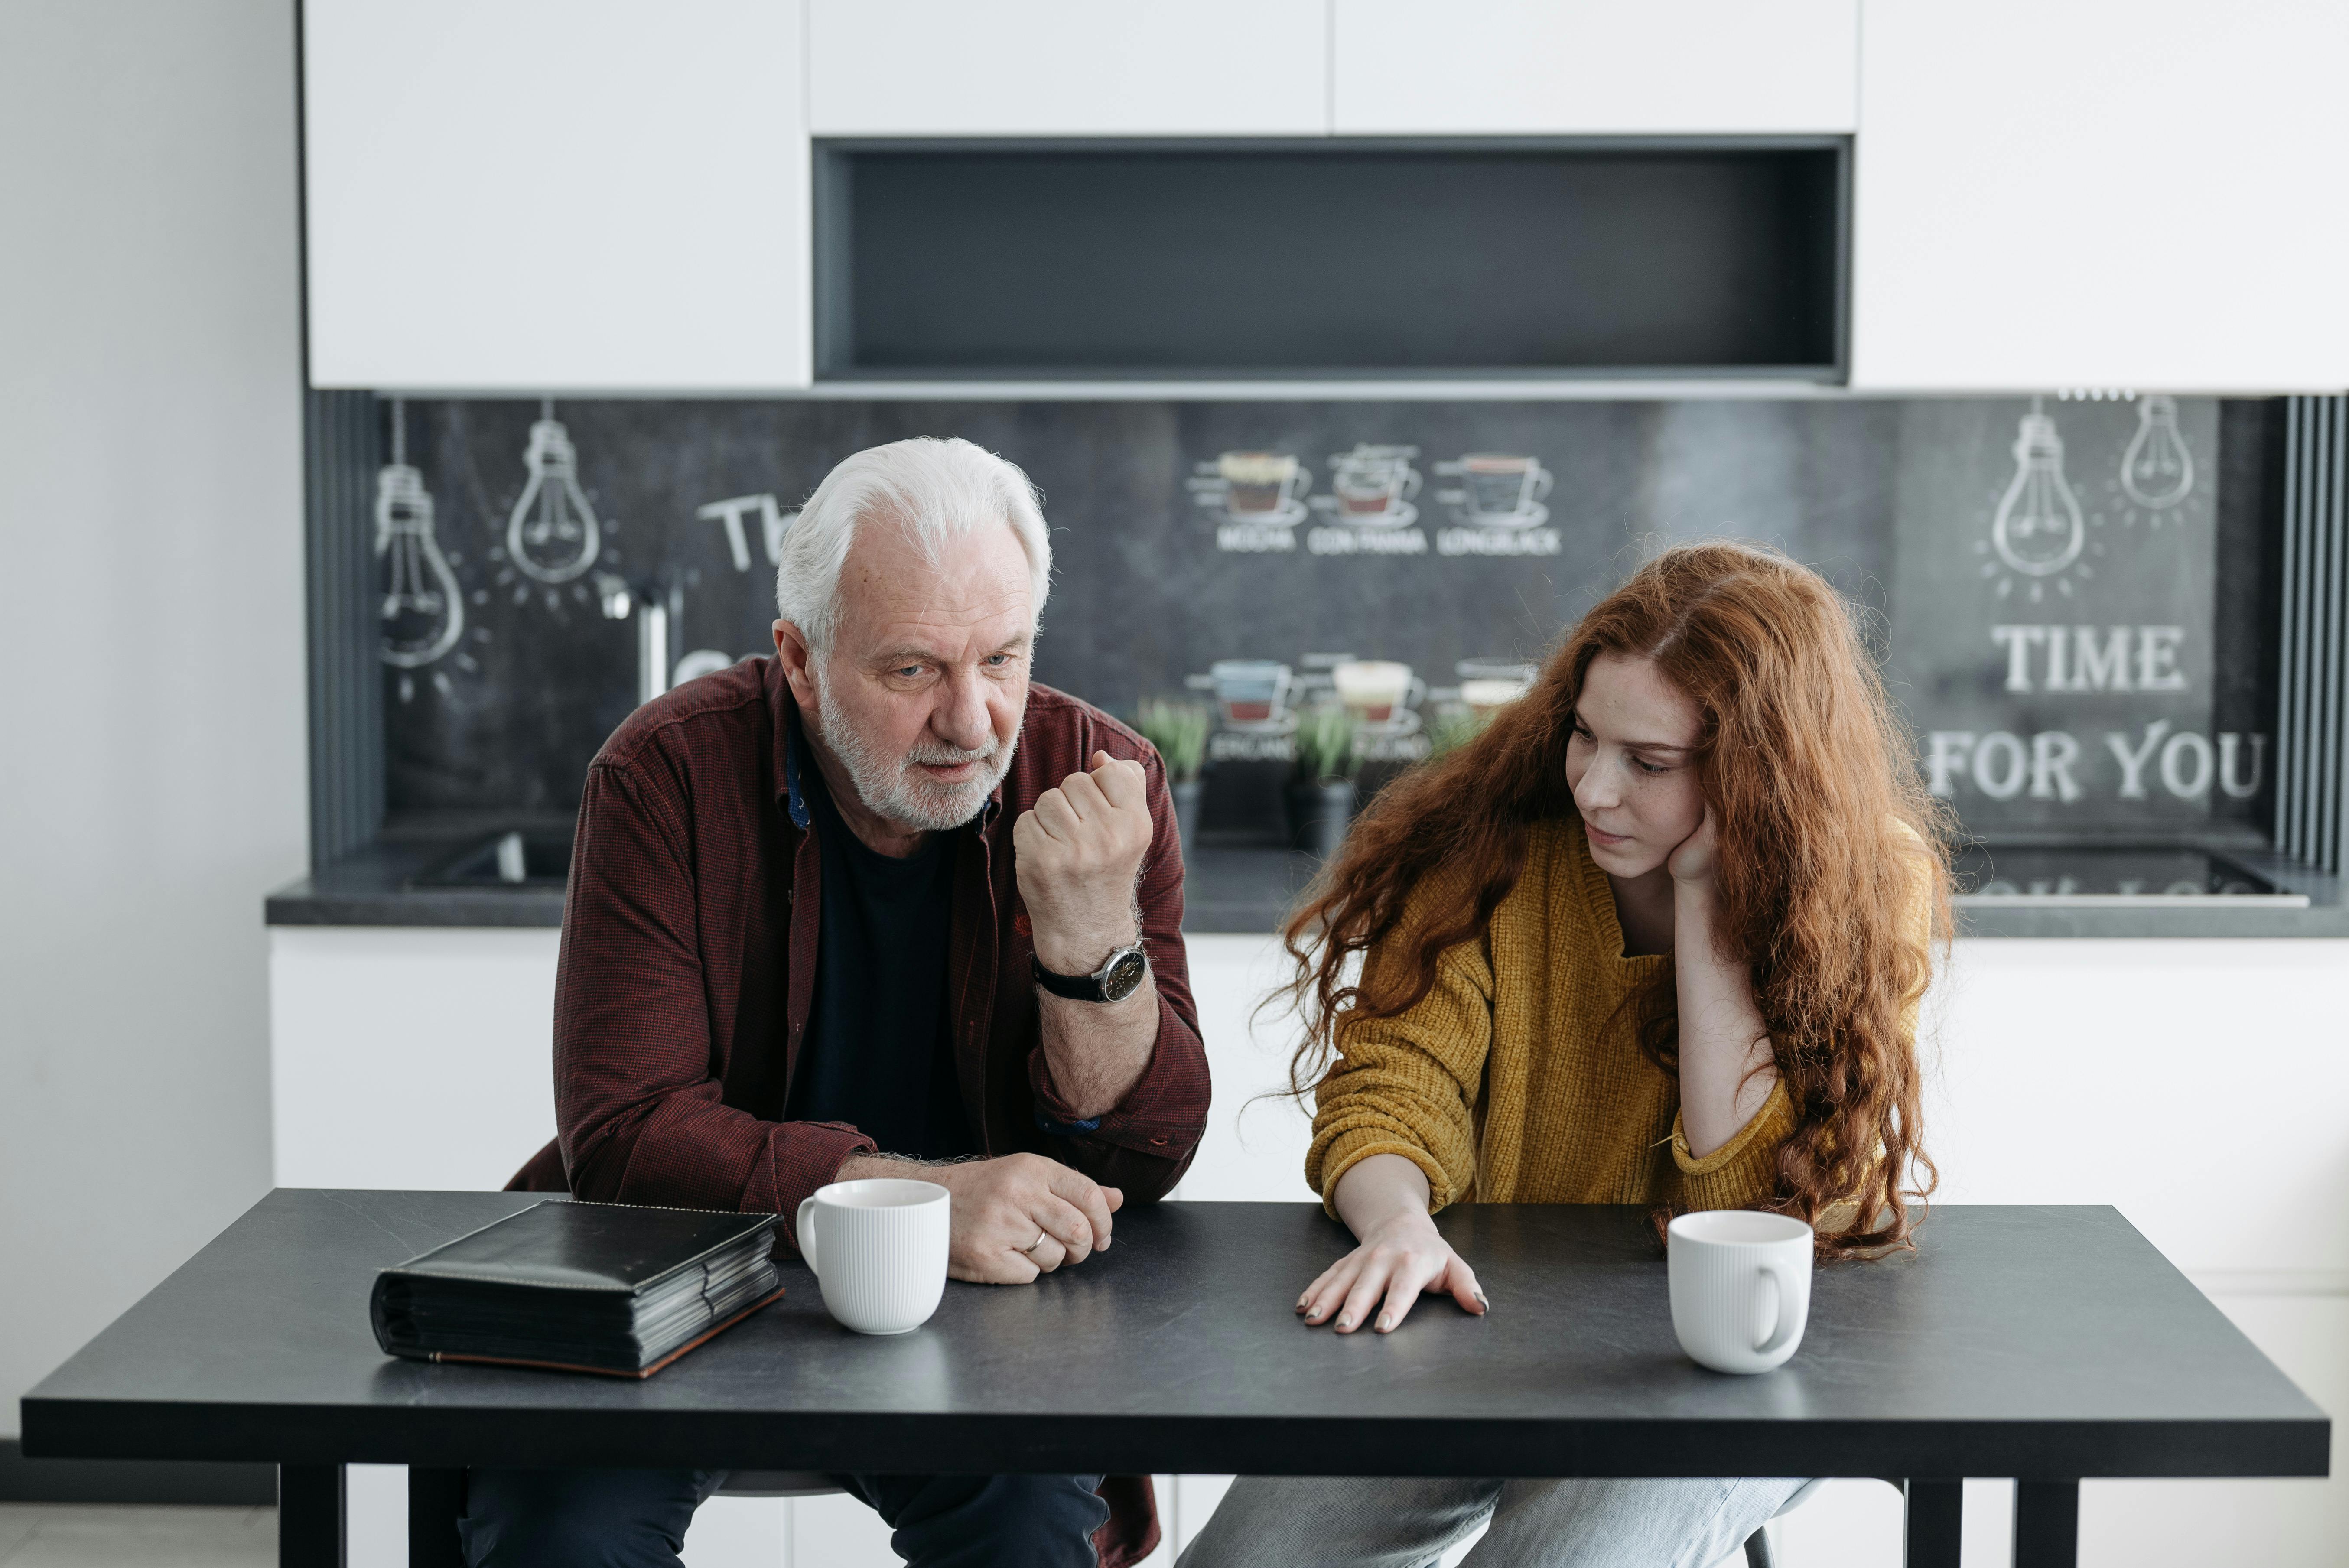 An older man having a serious conversation with a younger woman | Source: Pexels